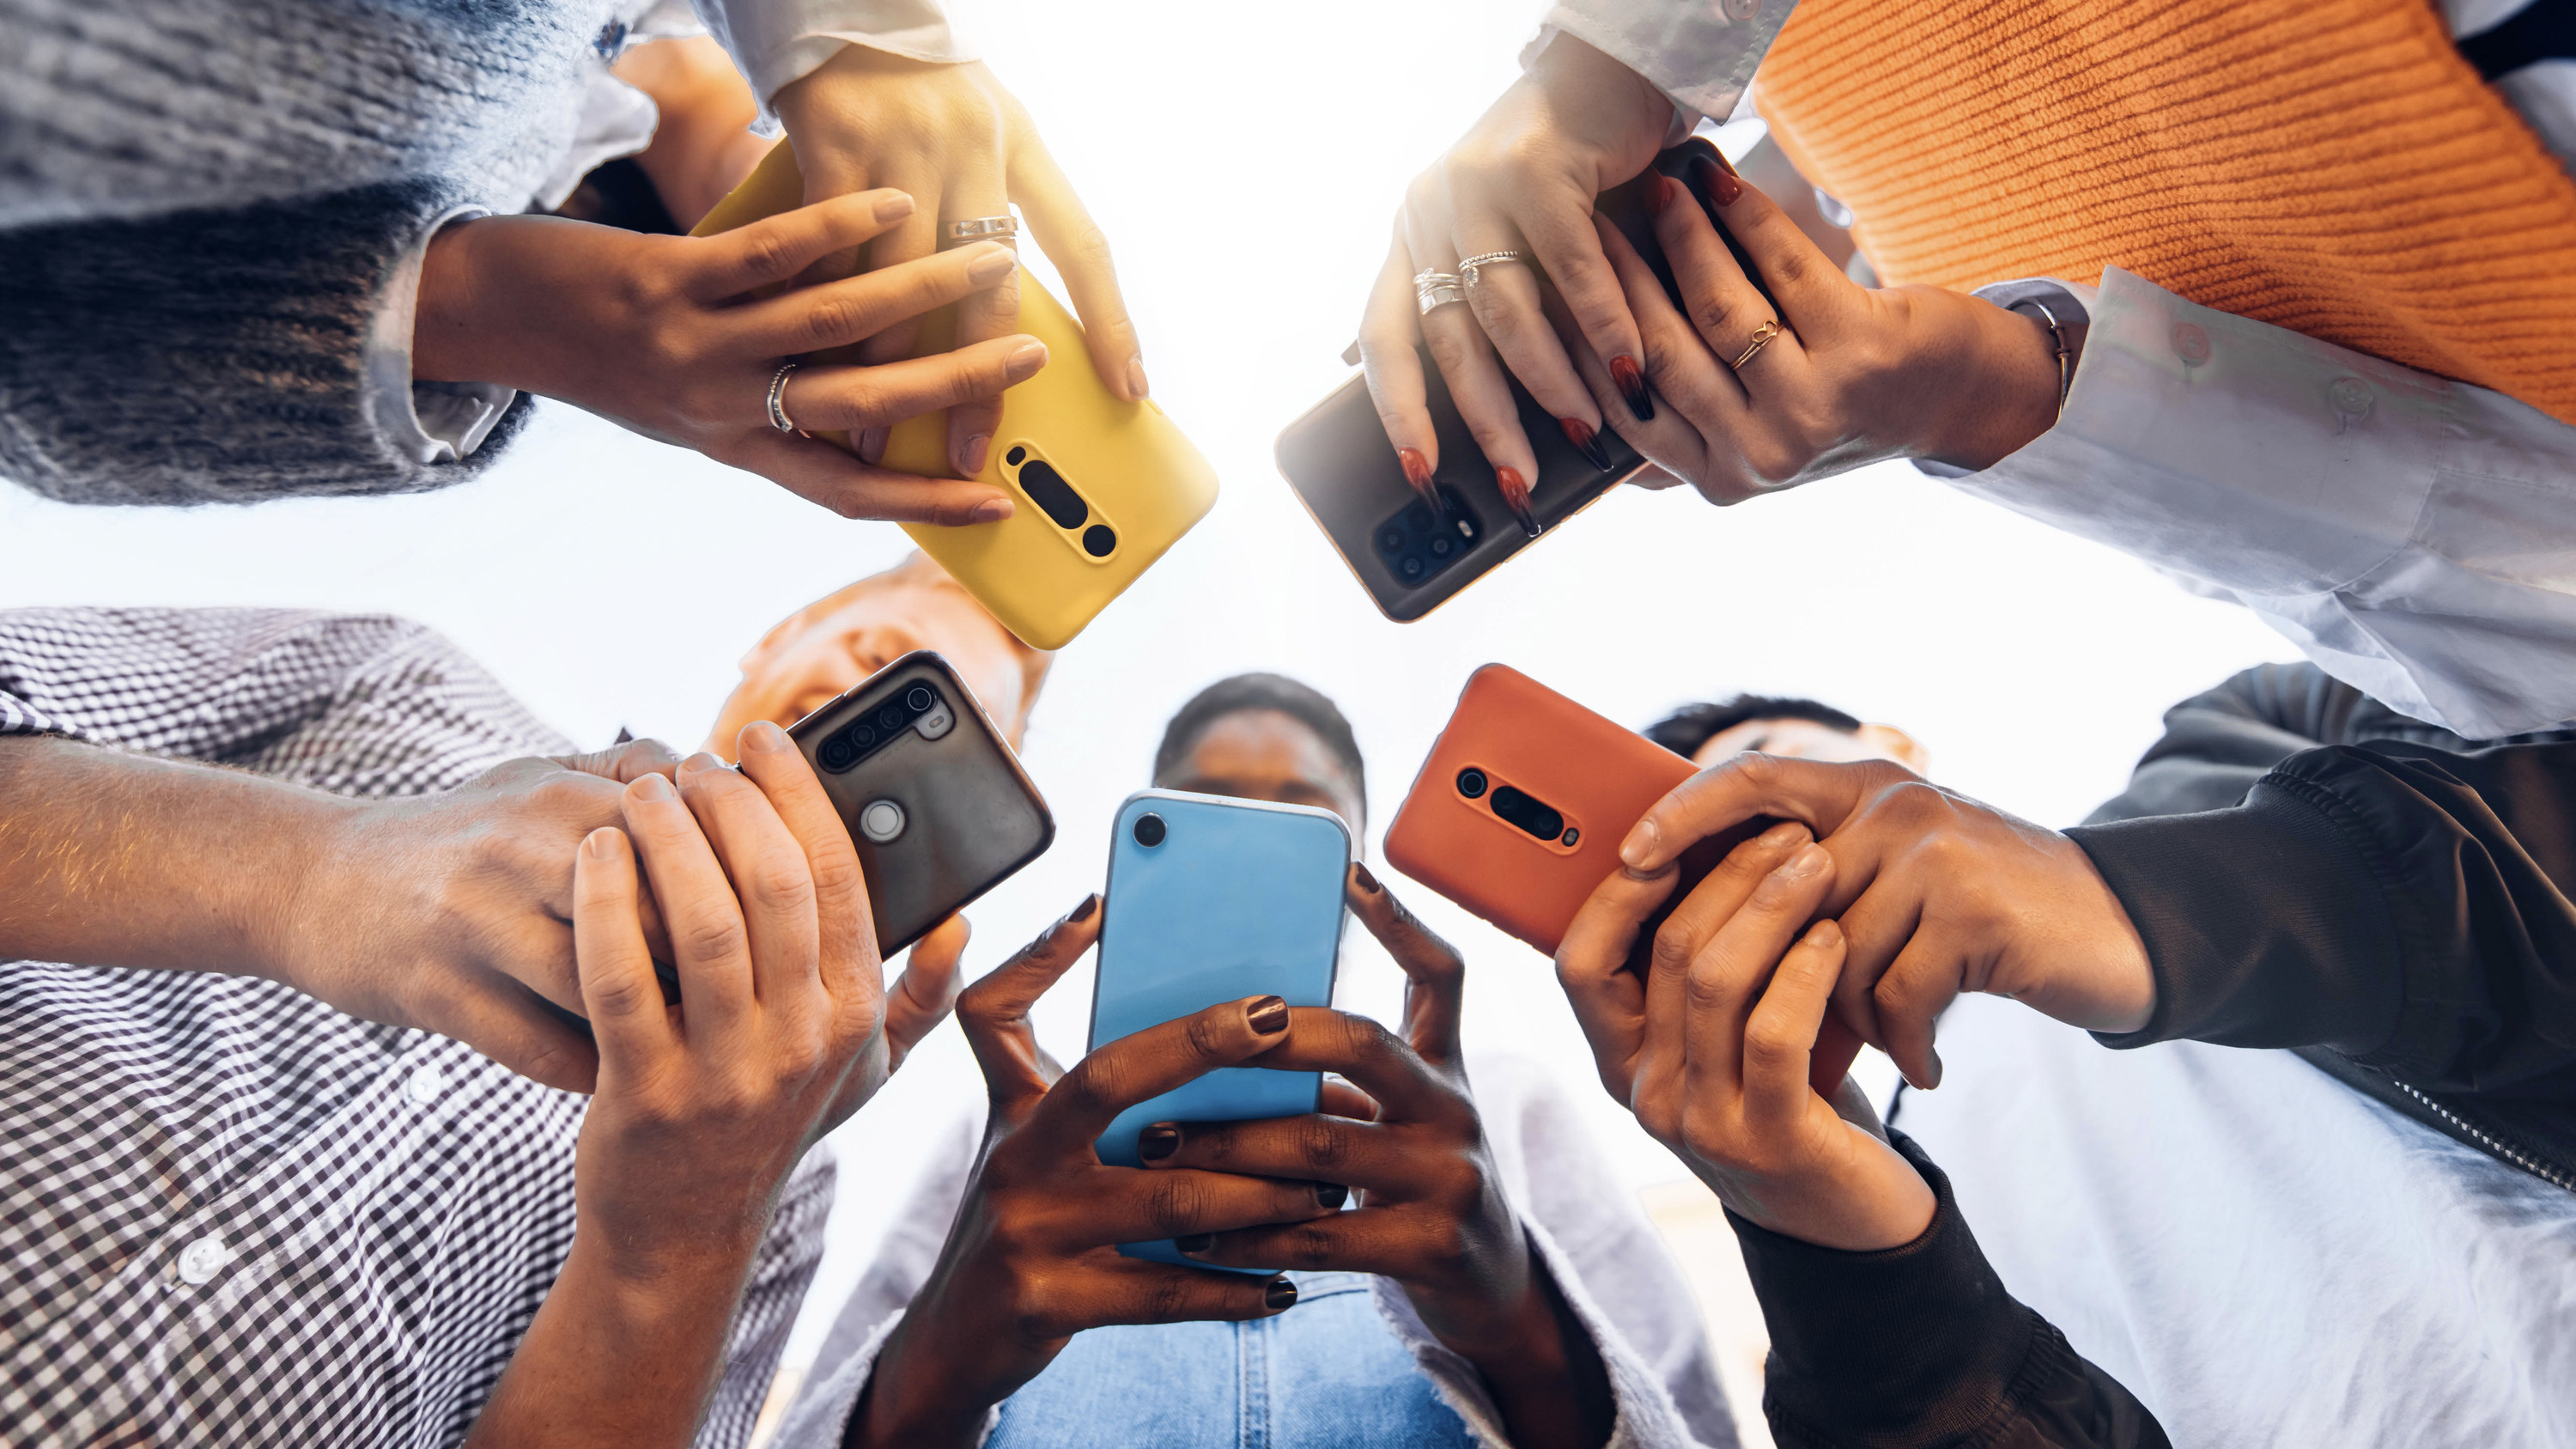 Hands on phones of people standing in a circle